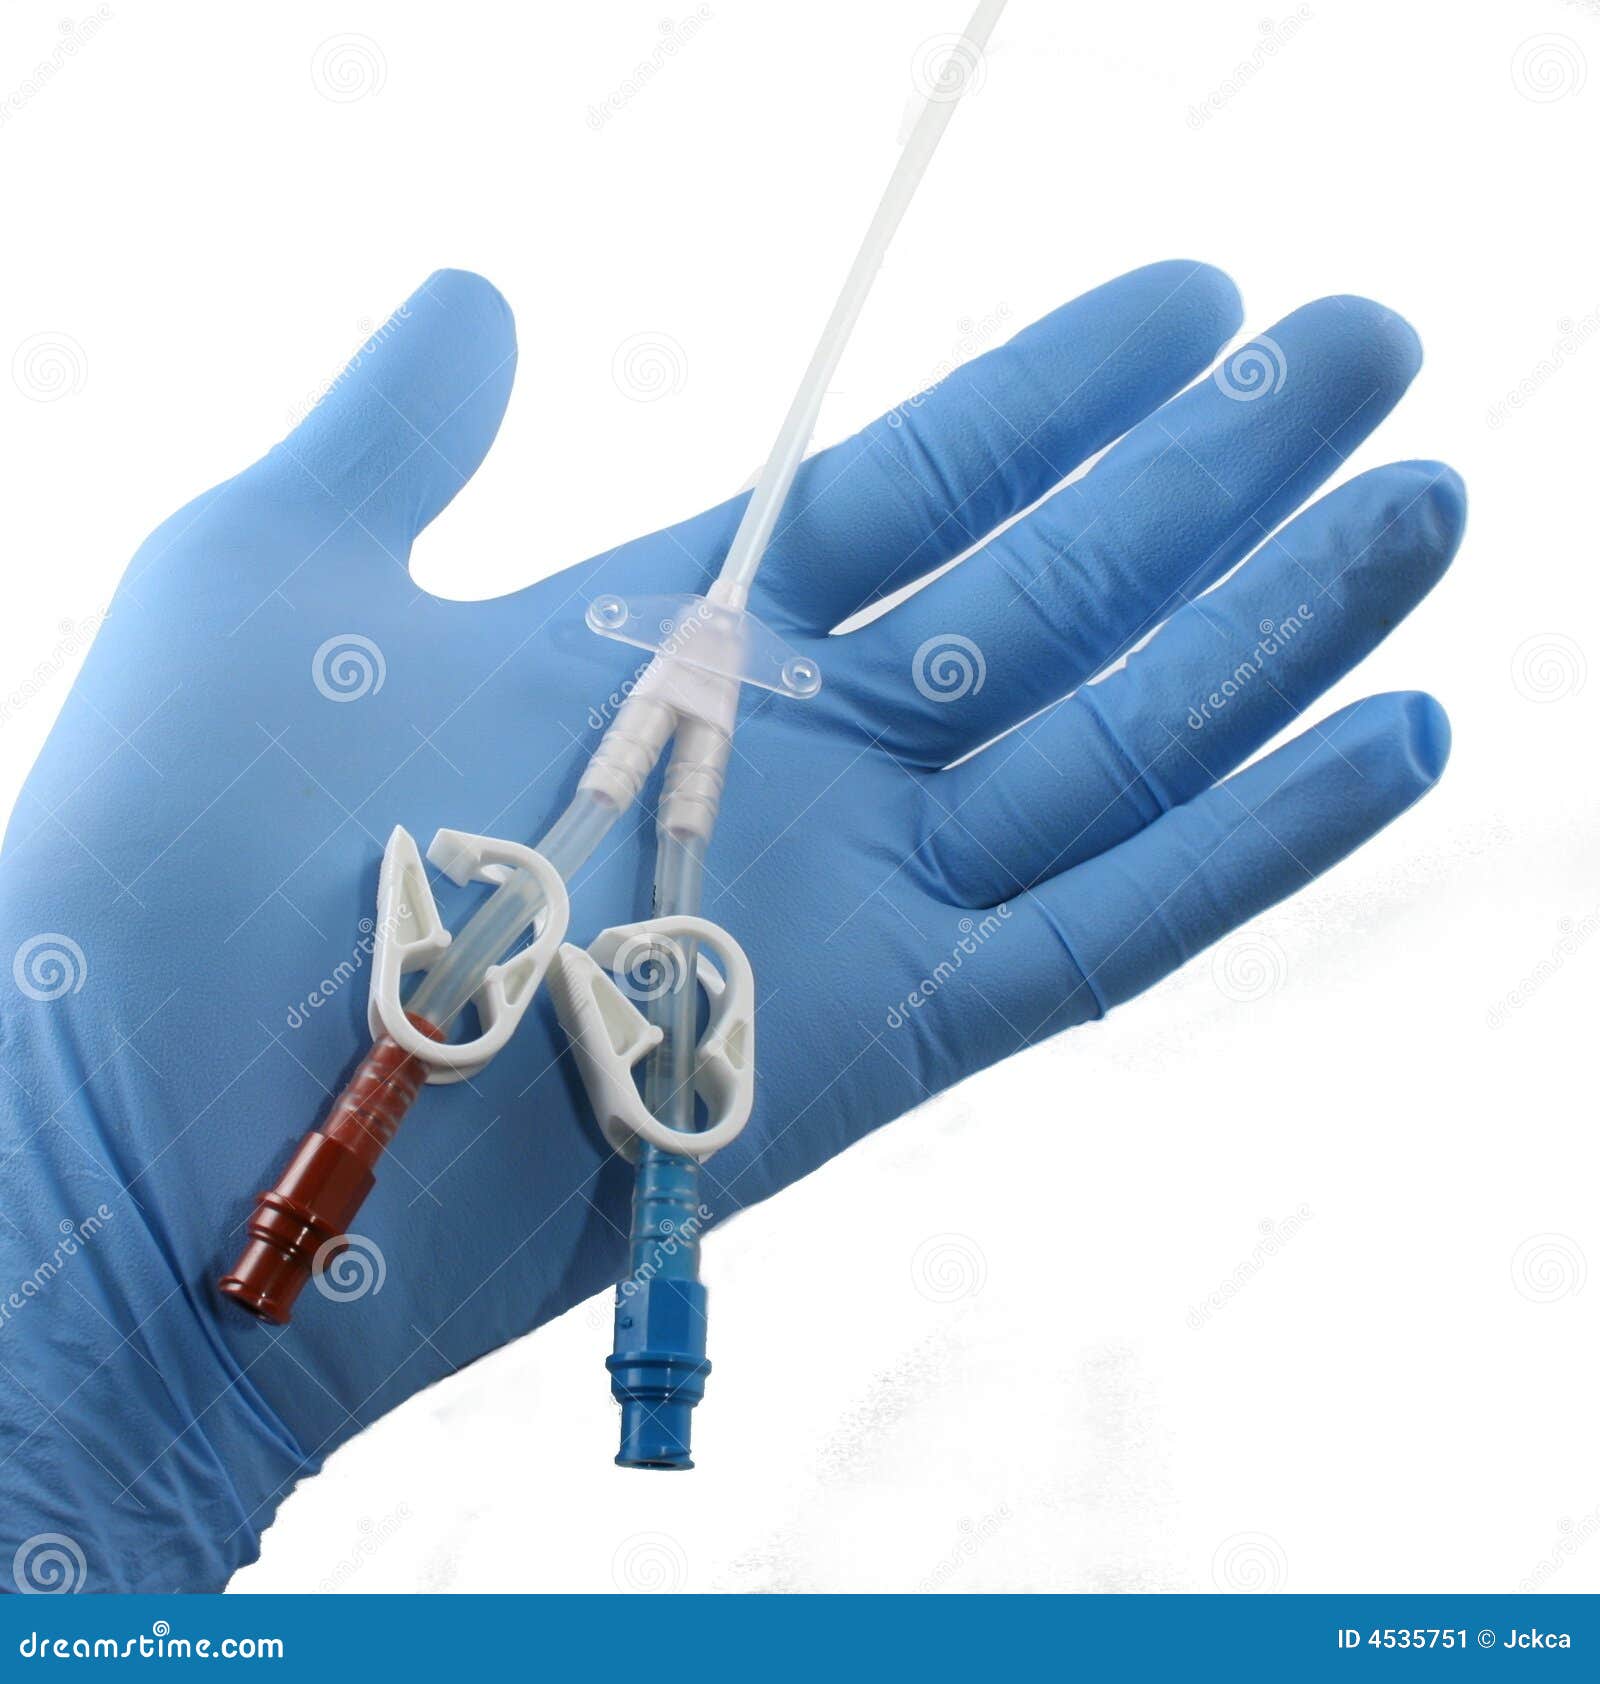 gloved hand holding a catheter